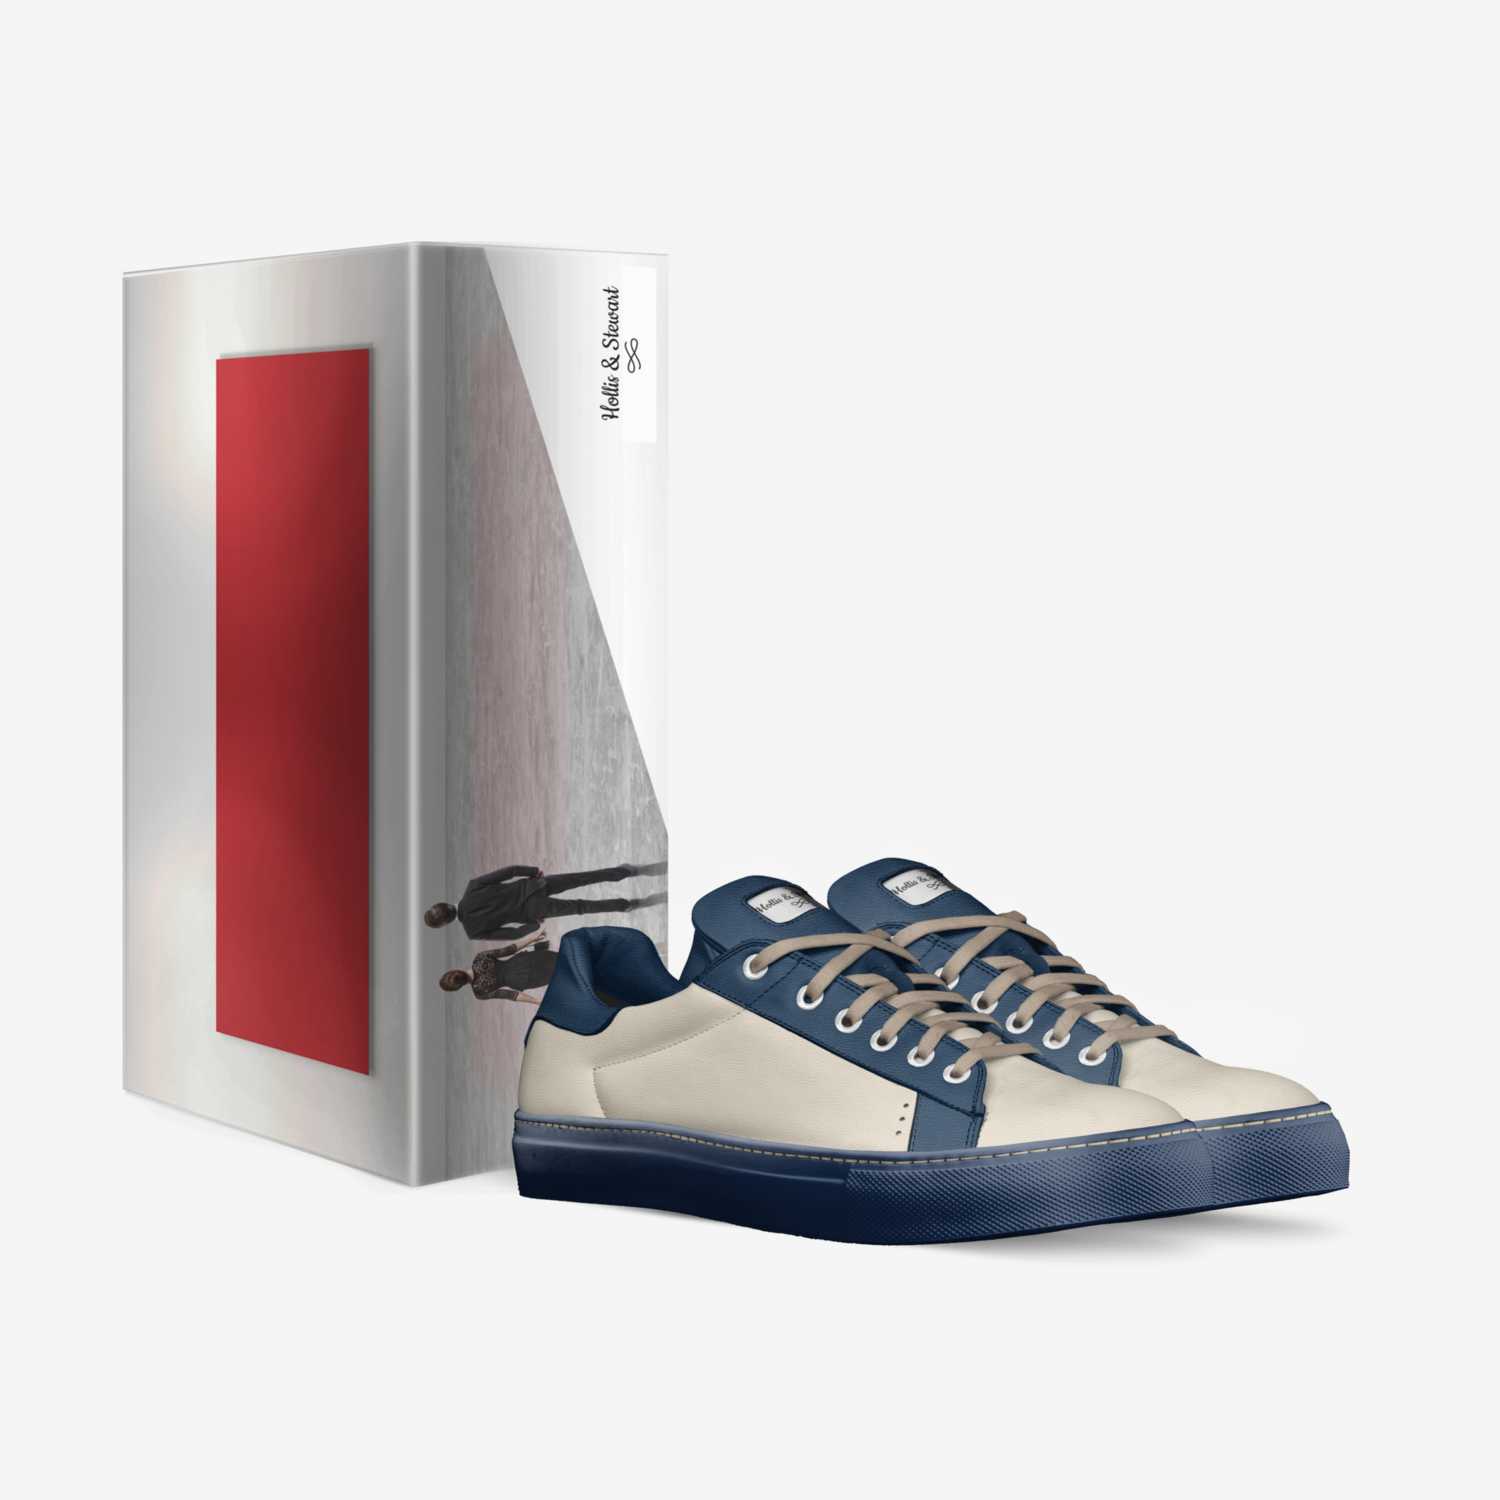 Hollis & Stewart custom made in Italy shoes by Kevin Graham | Box view